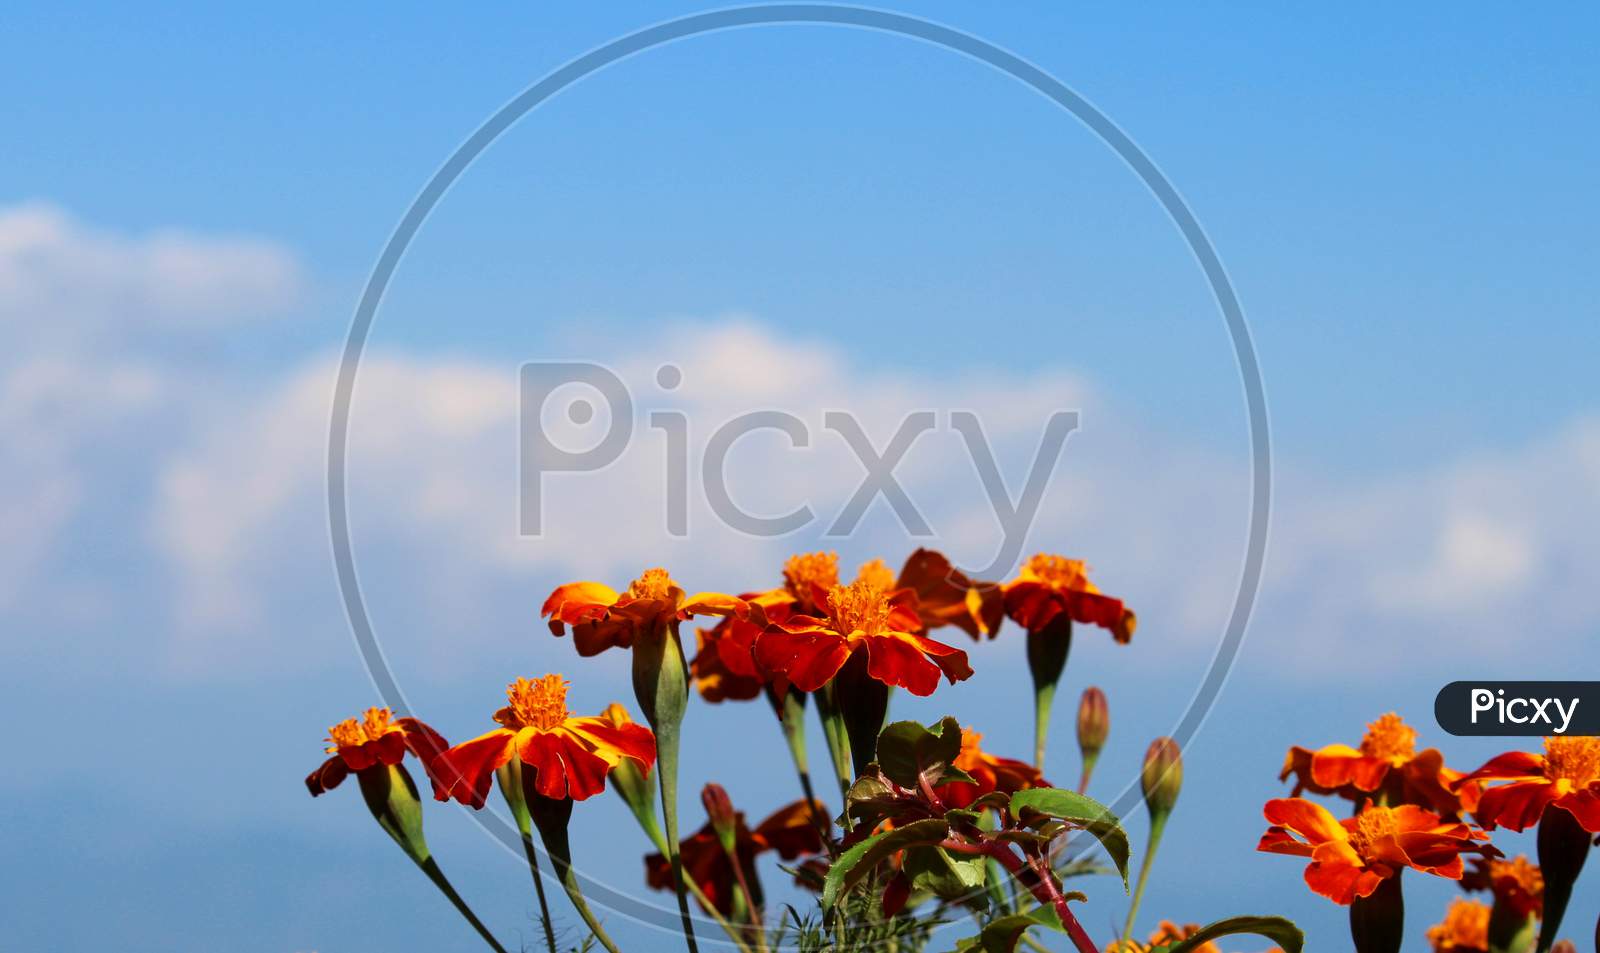 Beautiful Flowers Against the sky,Orange and Yellow Flowers Against the Blue Sky.